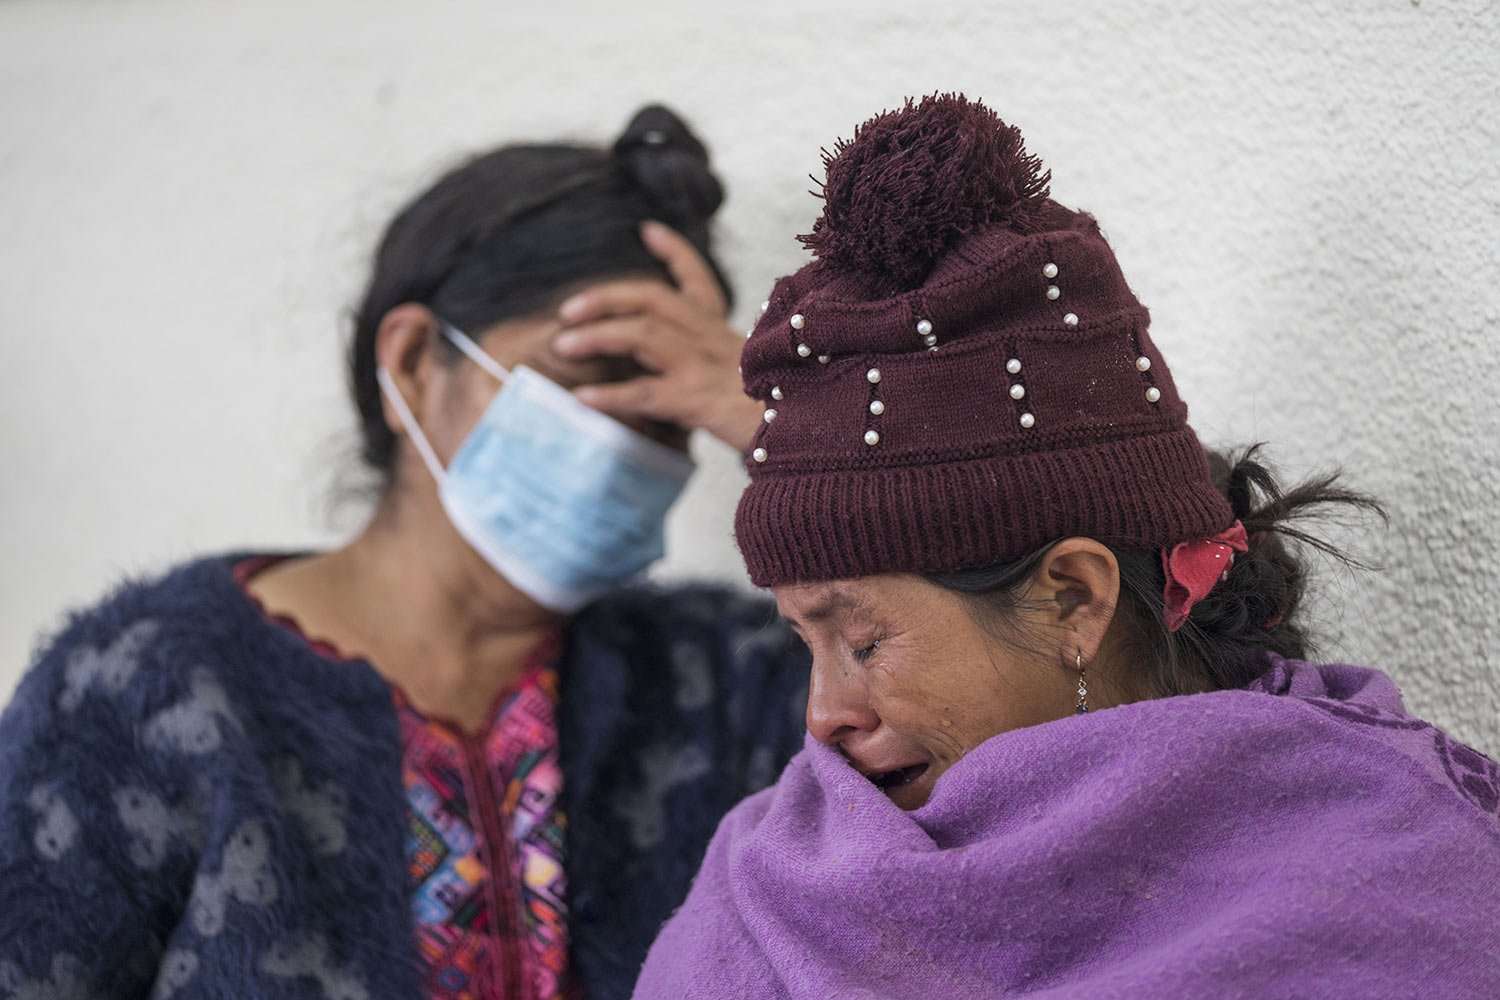  Magdalena Tepaz, mother of Wilmer Tulul, cries as she waits for a meeting to arrange the repatriation of her son's remains, outside the Foreign Ministry in Guatemala City, Thursday, June 30, 2022. Wilmer and his cousin Pascual Melvin Guachiac, both 